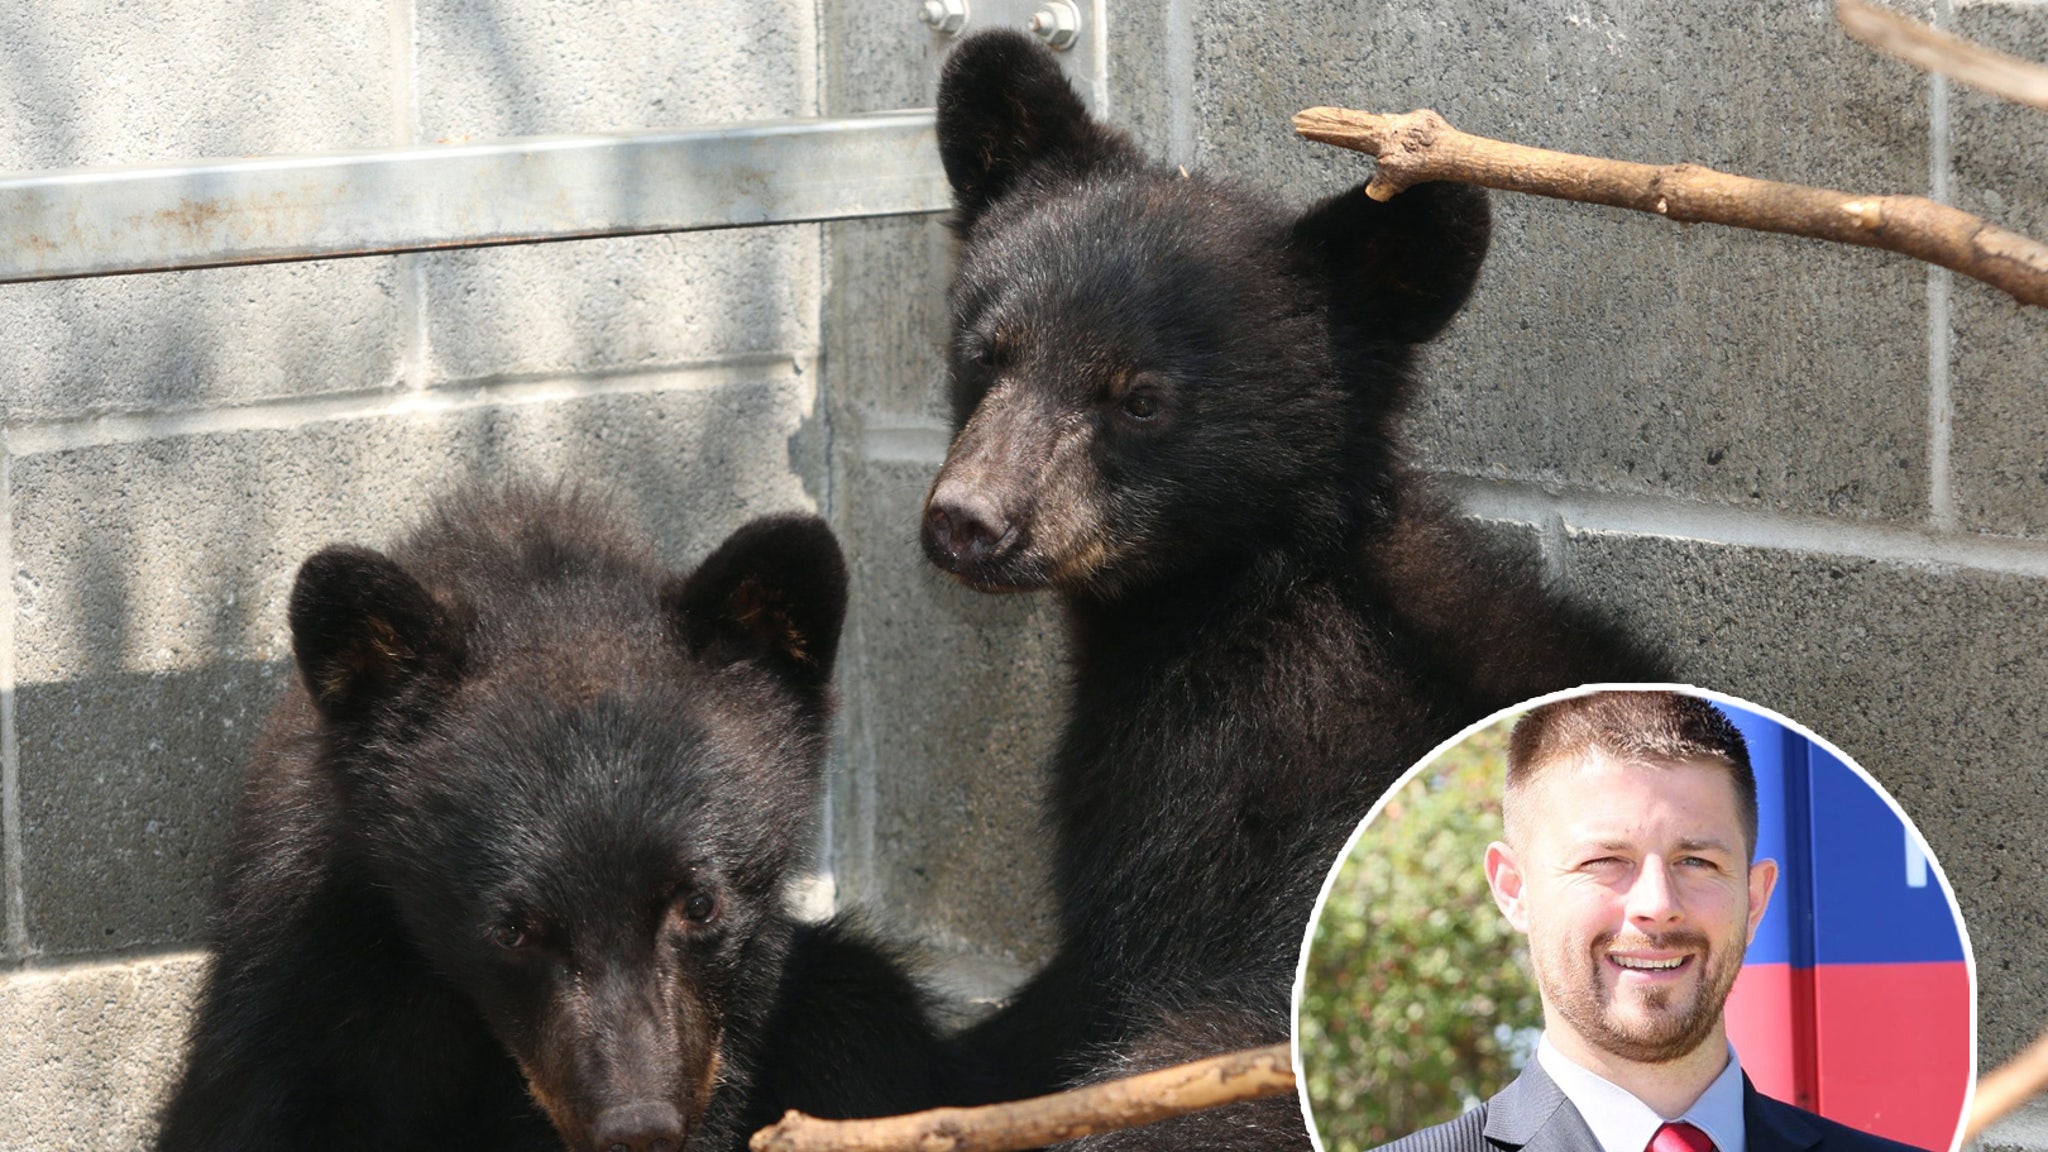 Conservation officer fired for refusing to shoot two bears for cubs to get job back